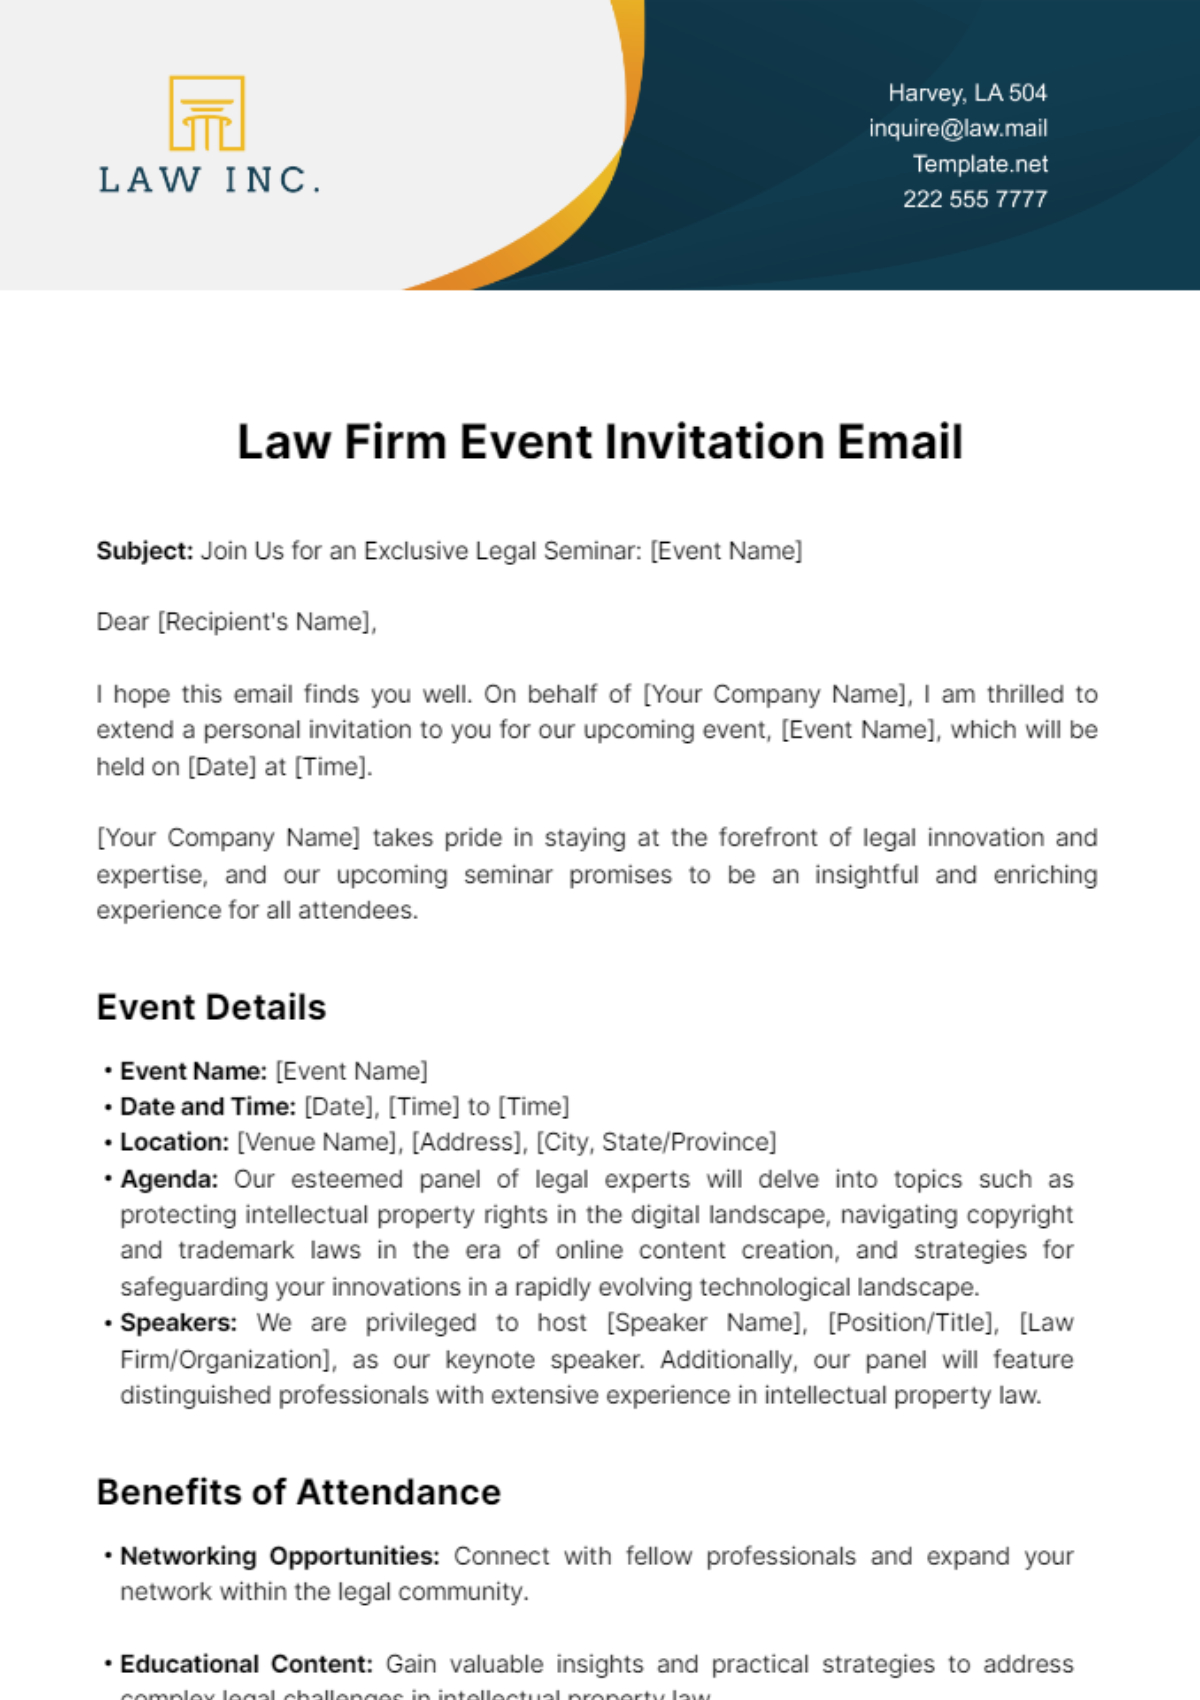 Free Law Firm Event Invitation Email Template